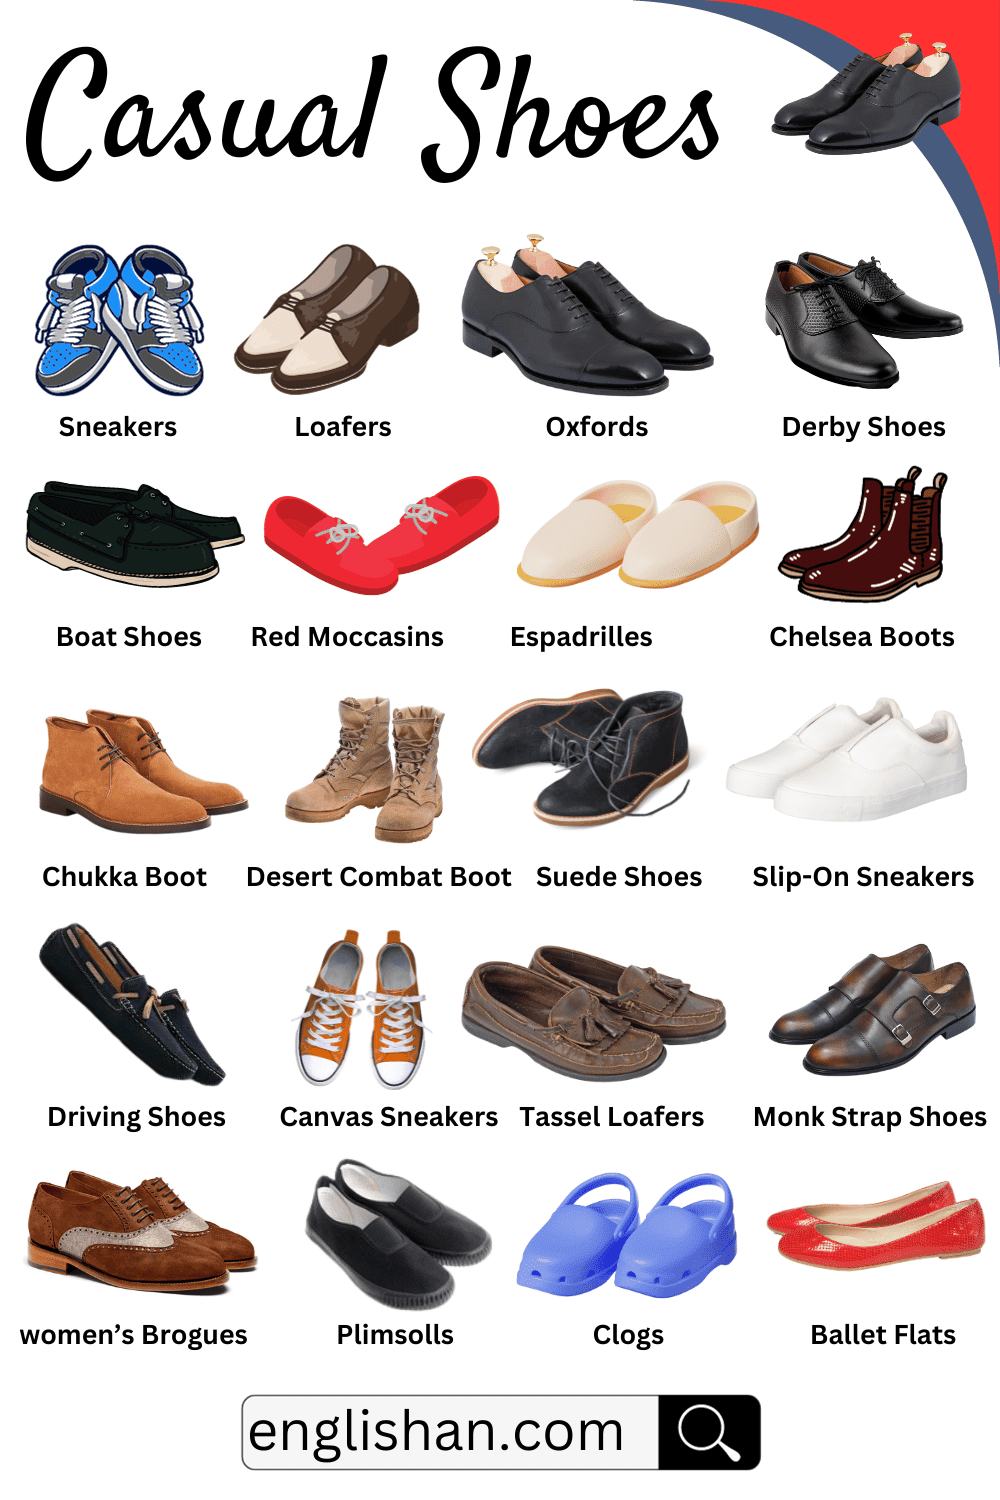 Shoe Dictionary - Common Shoes Styles By Name | Fashion shoes, Shoe style,  Shoes outfit fashion